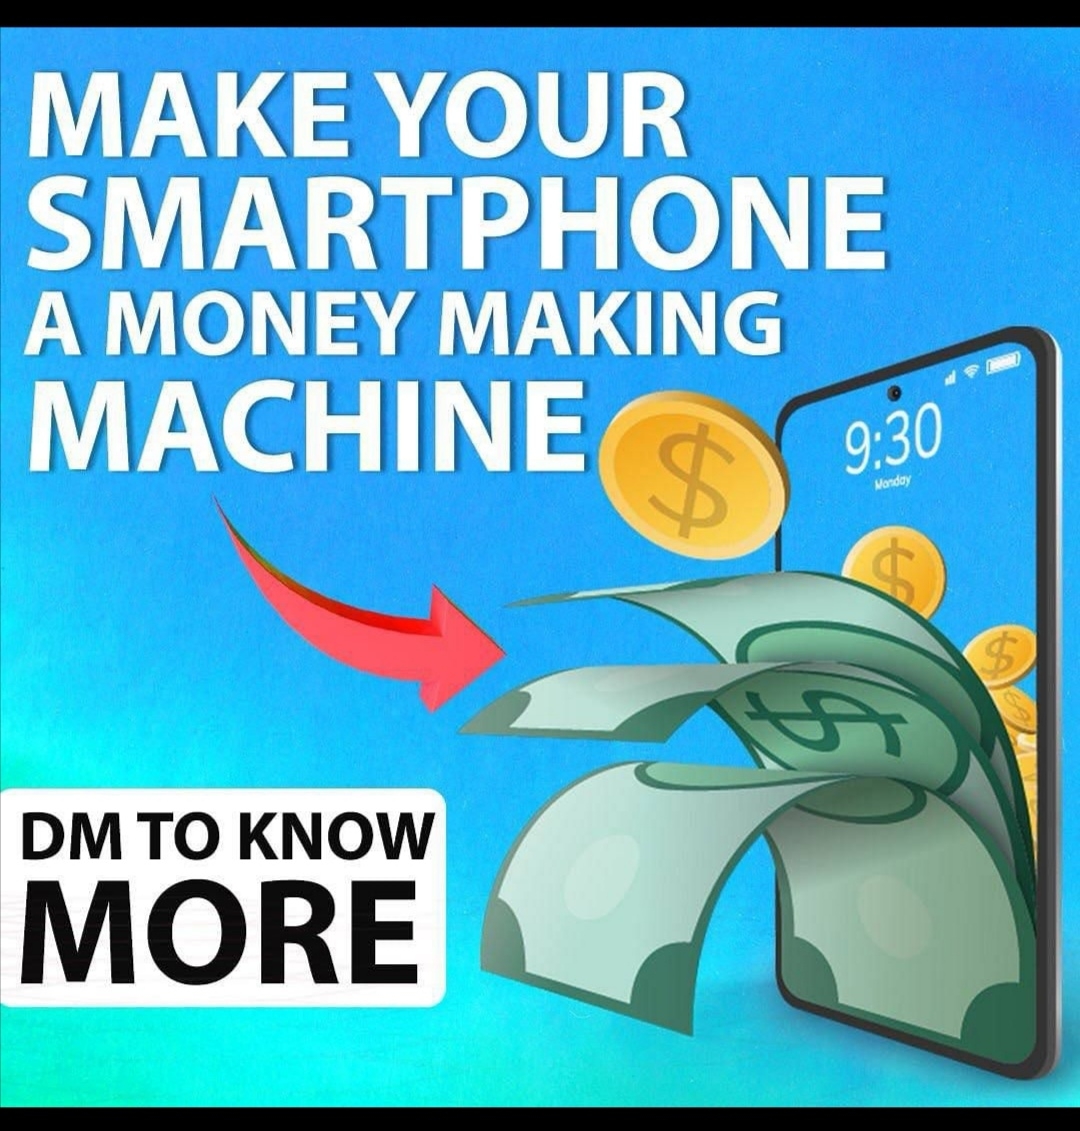 Work with your smart phone